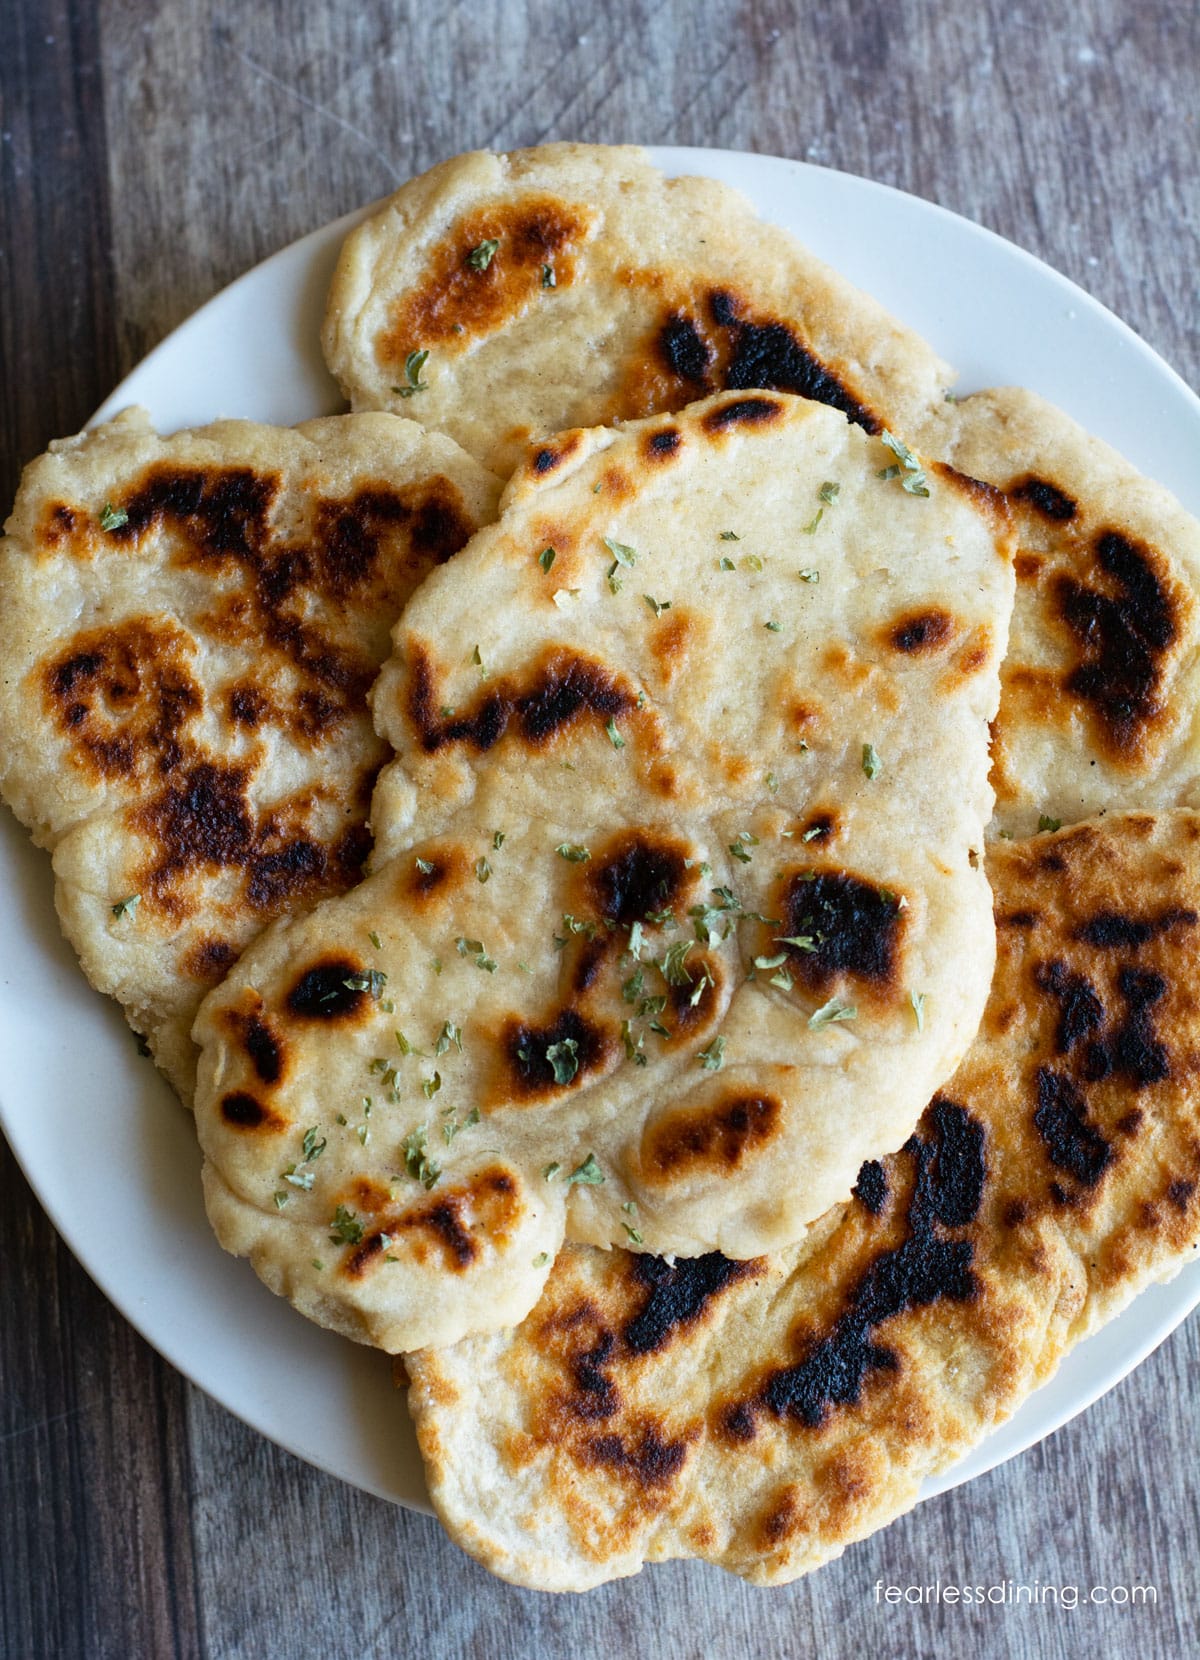 A plate full of gluten free naan made with my DIY gluten free flour blend.